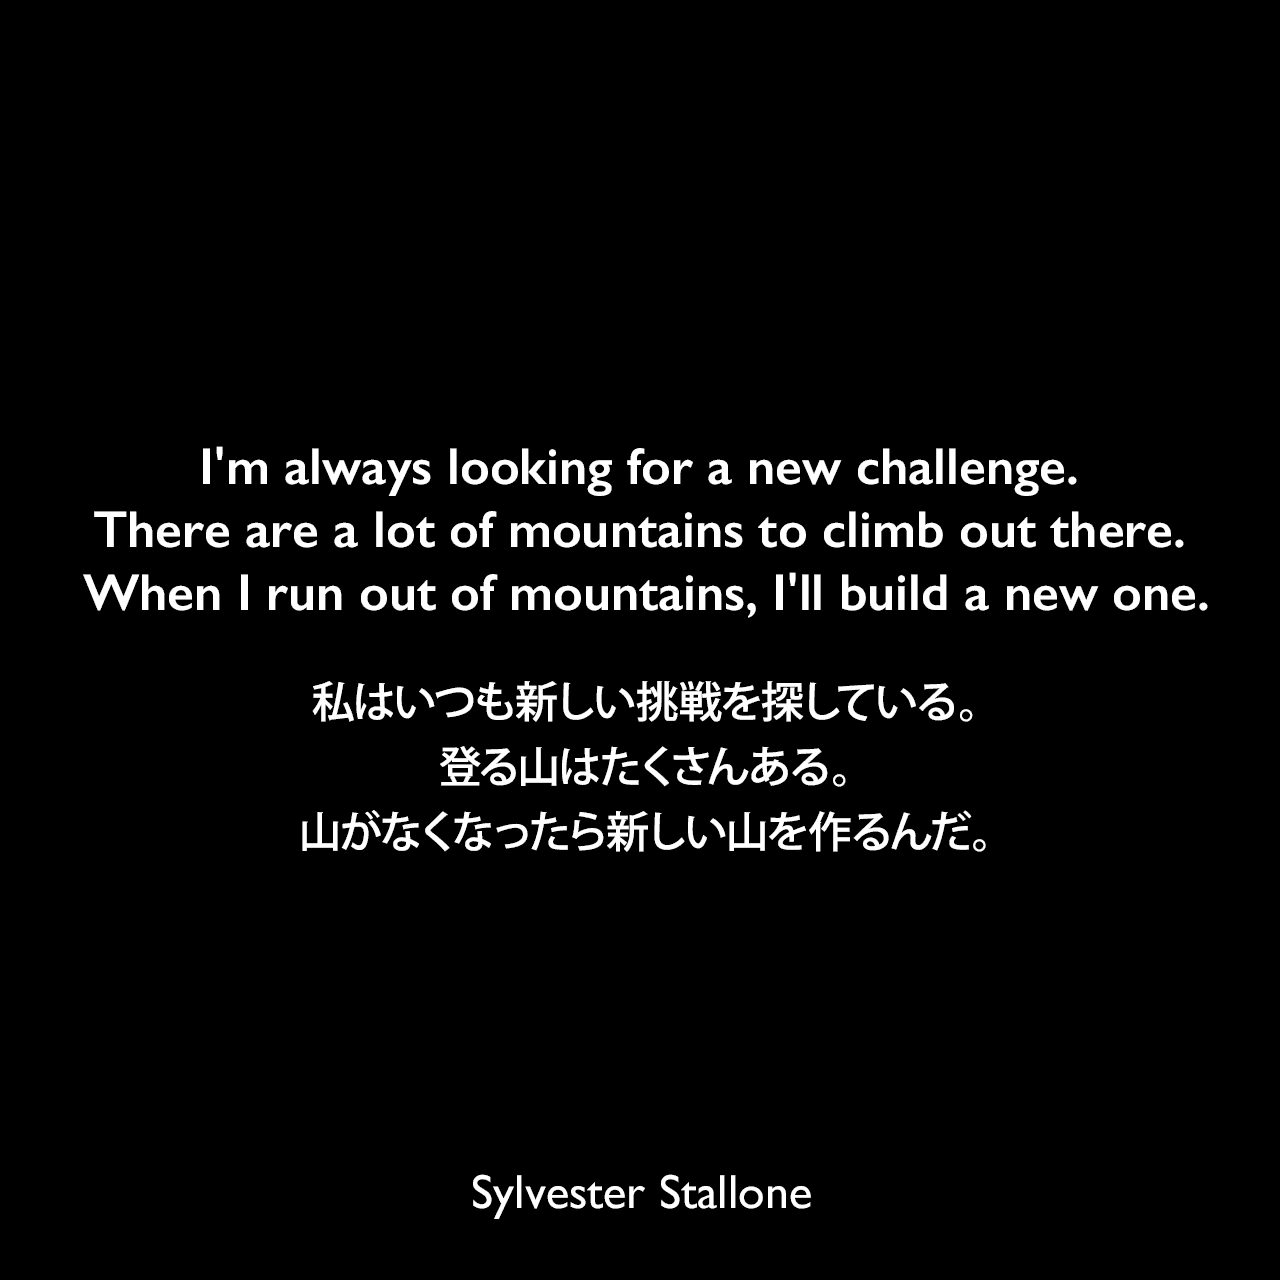 I'm always looking for a new challenge. There are a lot of mountains to climb out there. When I run out of mountains, I'll build a new one.私はいつも新しい挑戦を探している。登る山はたくさんある。山がなくなったら新しい山を作るんだ。Sylvester Stallone